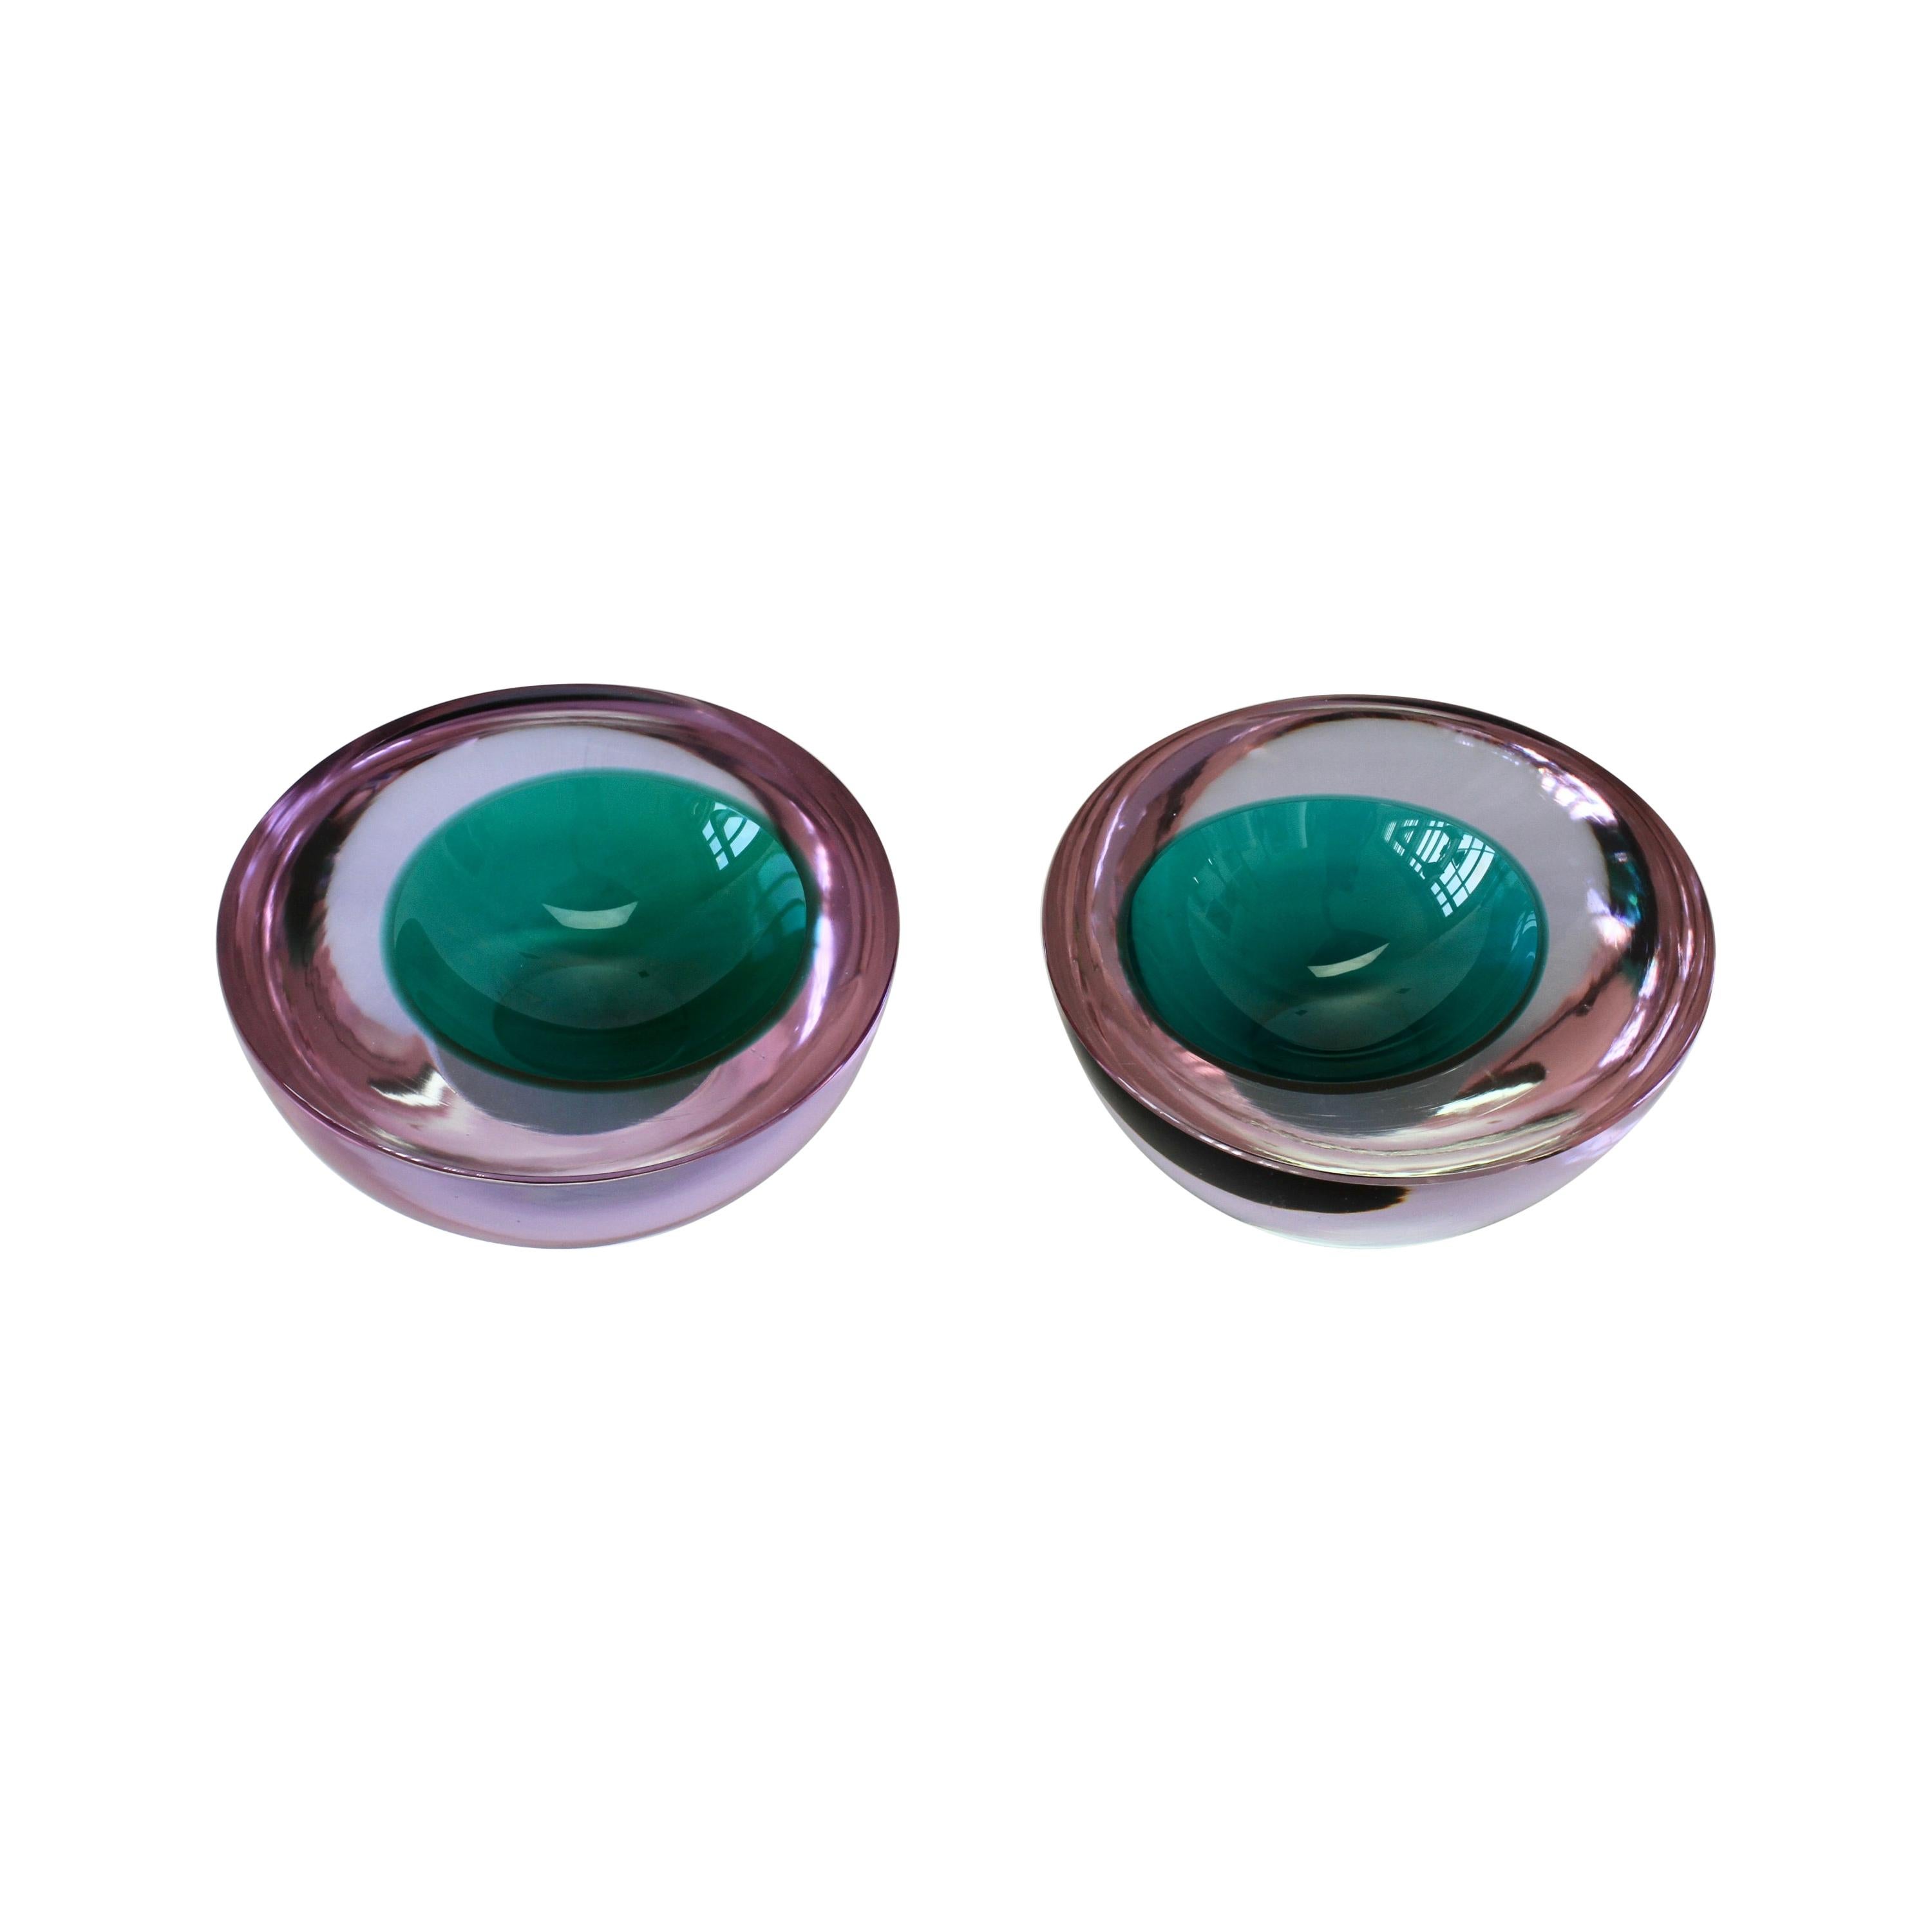 Cenedese Pair of Lilac & Green Sommerso Murano Glass Bowls, Dish or Ashtray